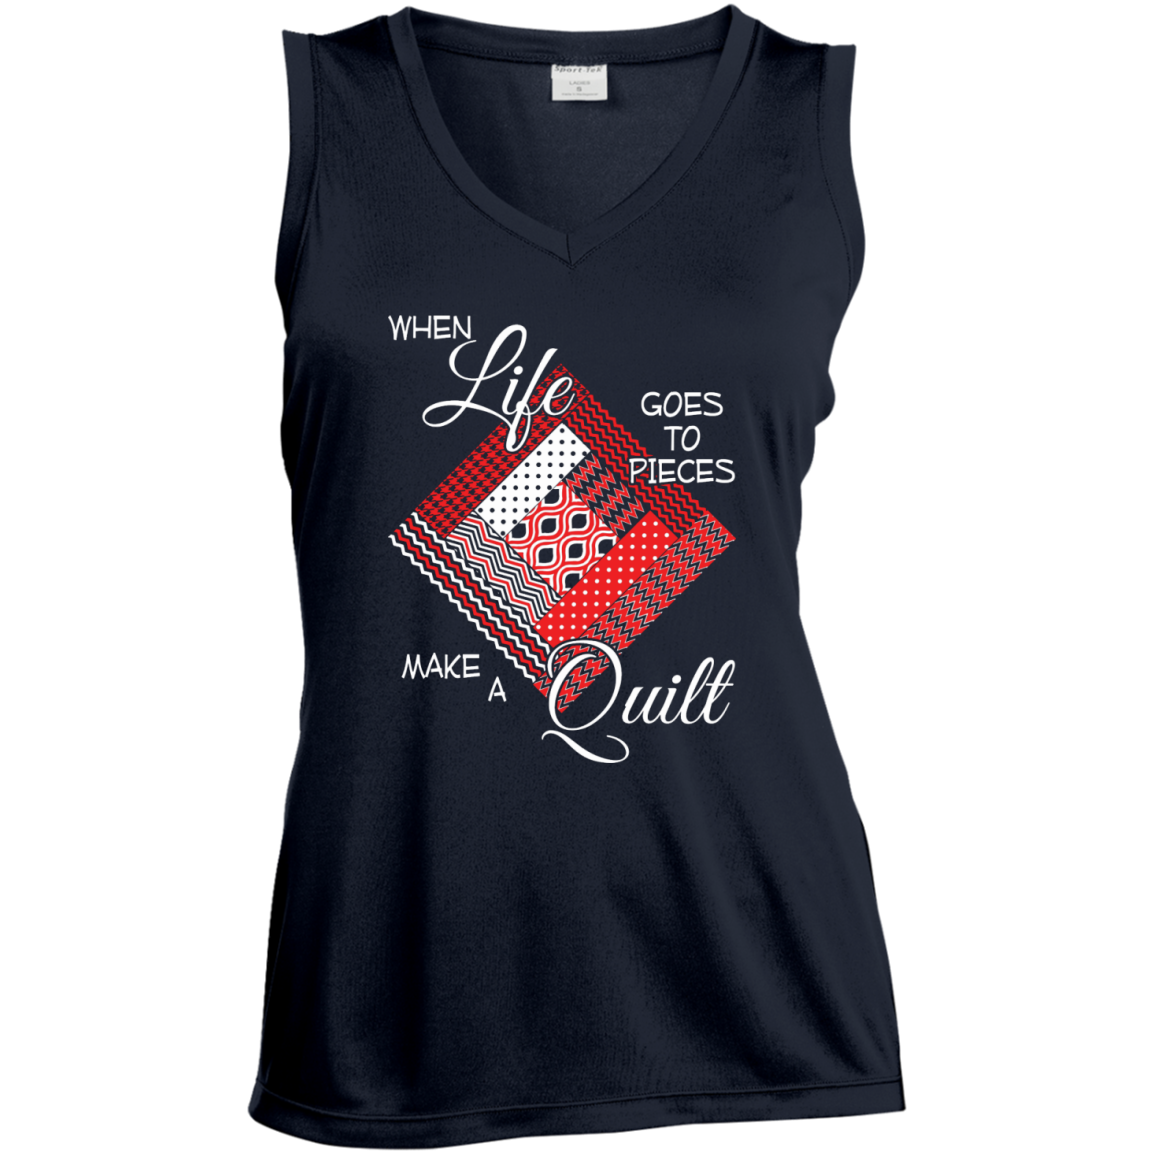 Make a Quilt (red) Ladies Sleeveless V-Neck - Crafter4Life - 3